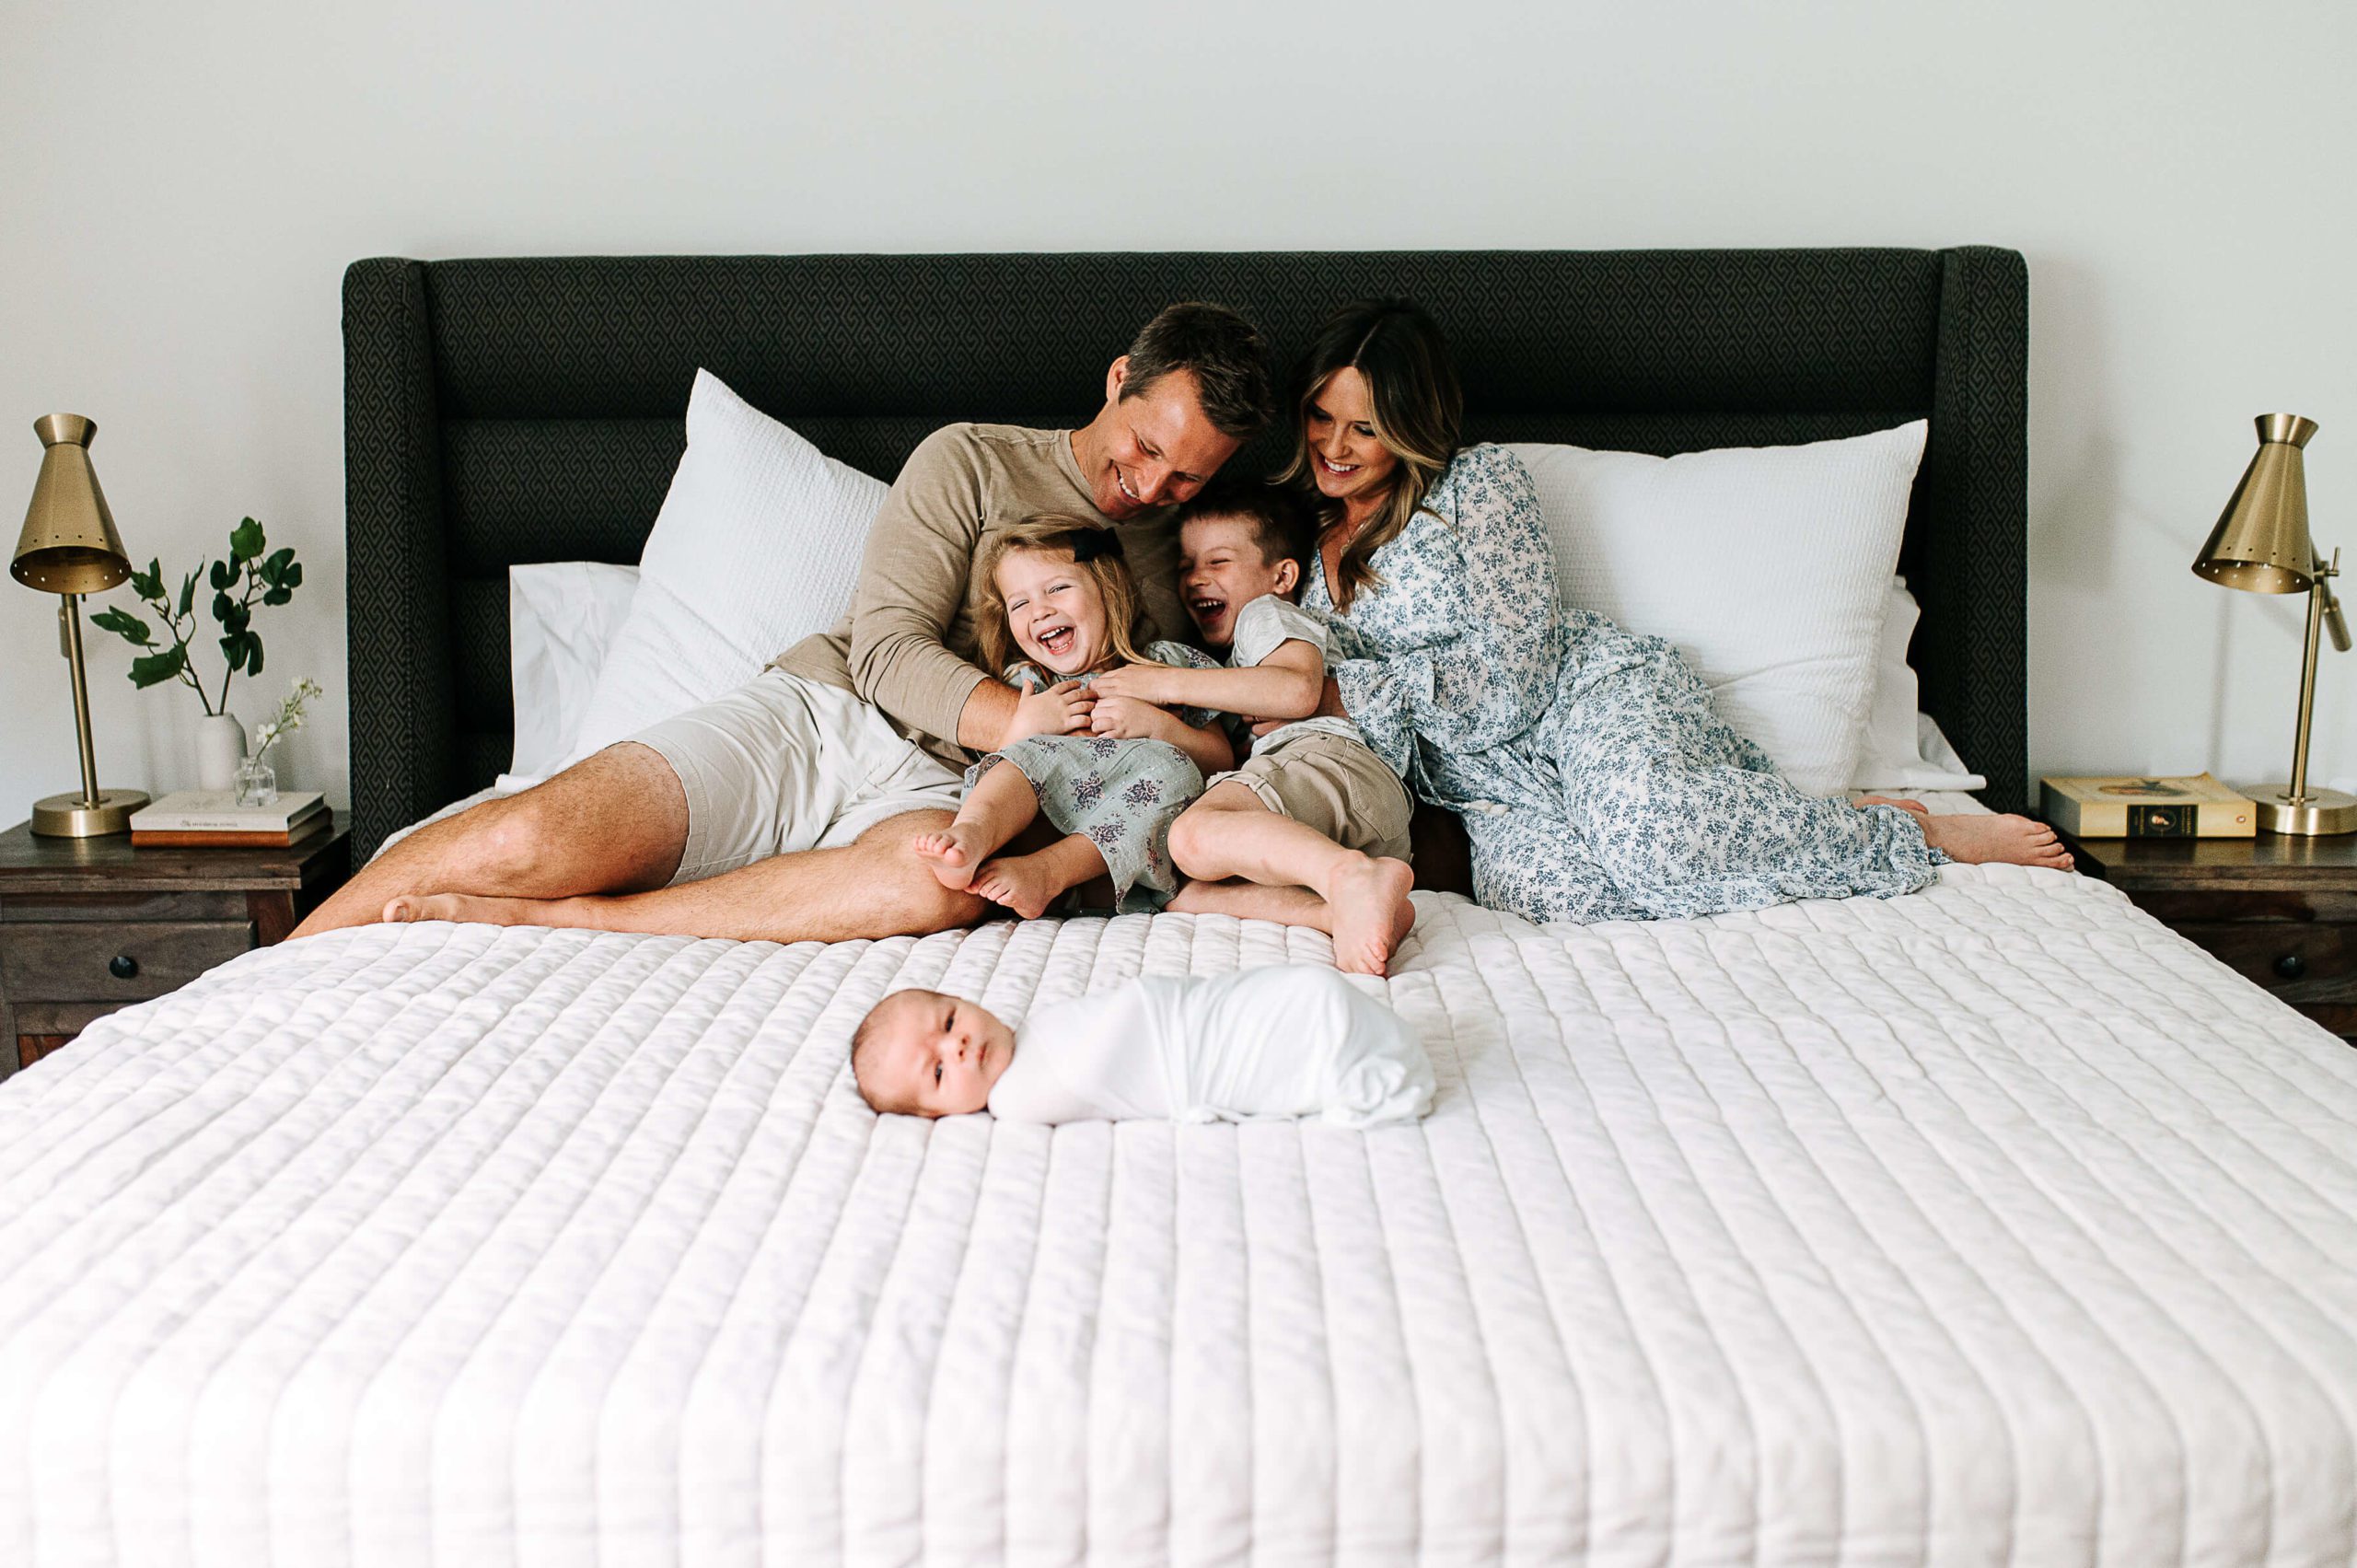 family giggles on bed with white bedding and swaddled newborn baby